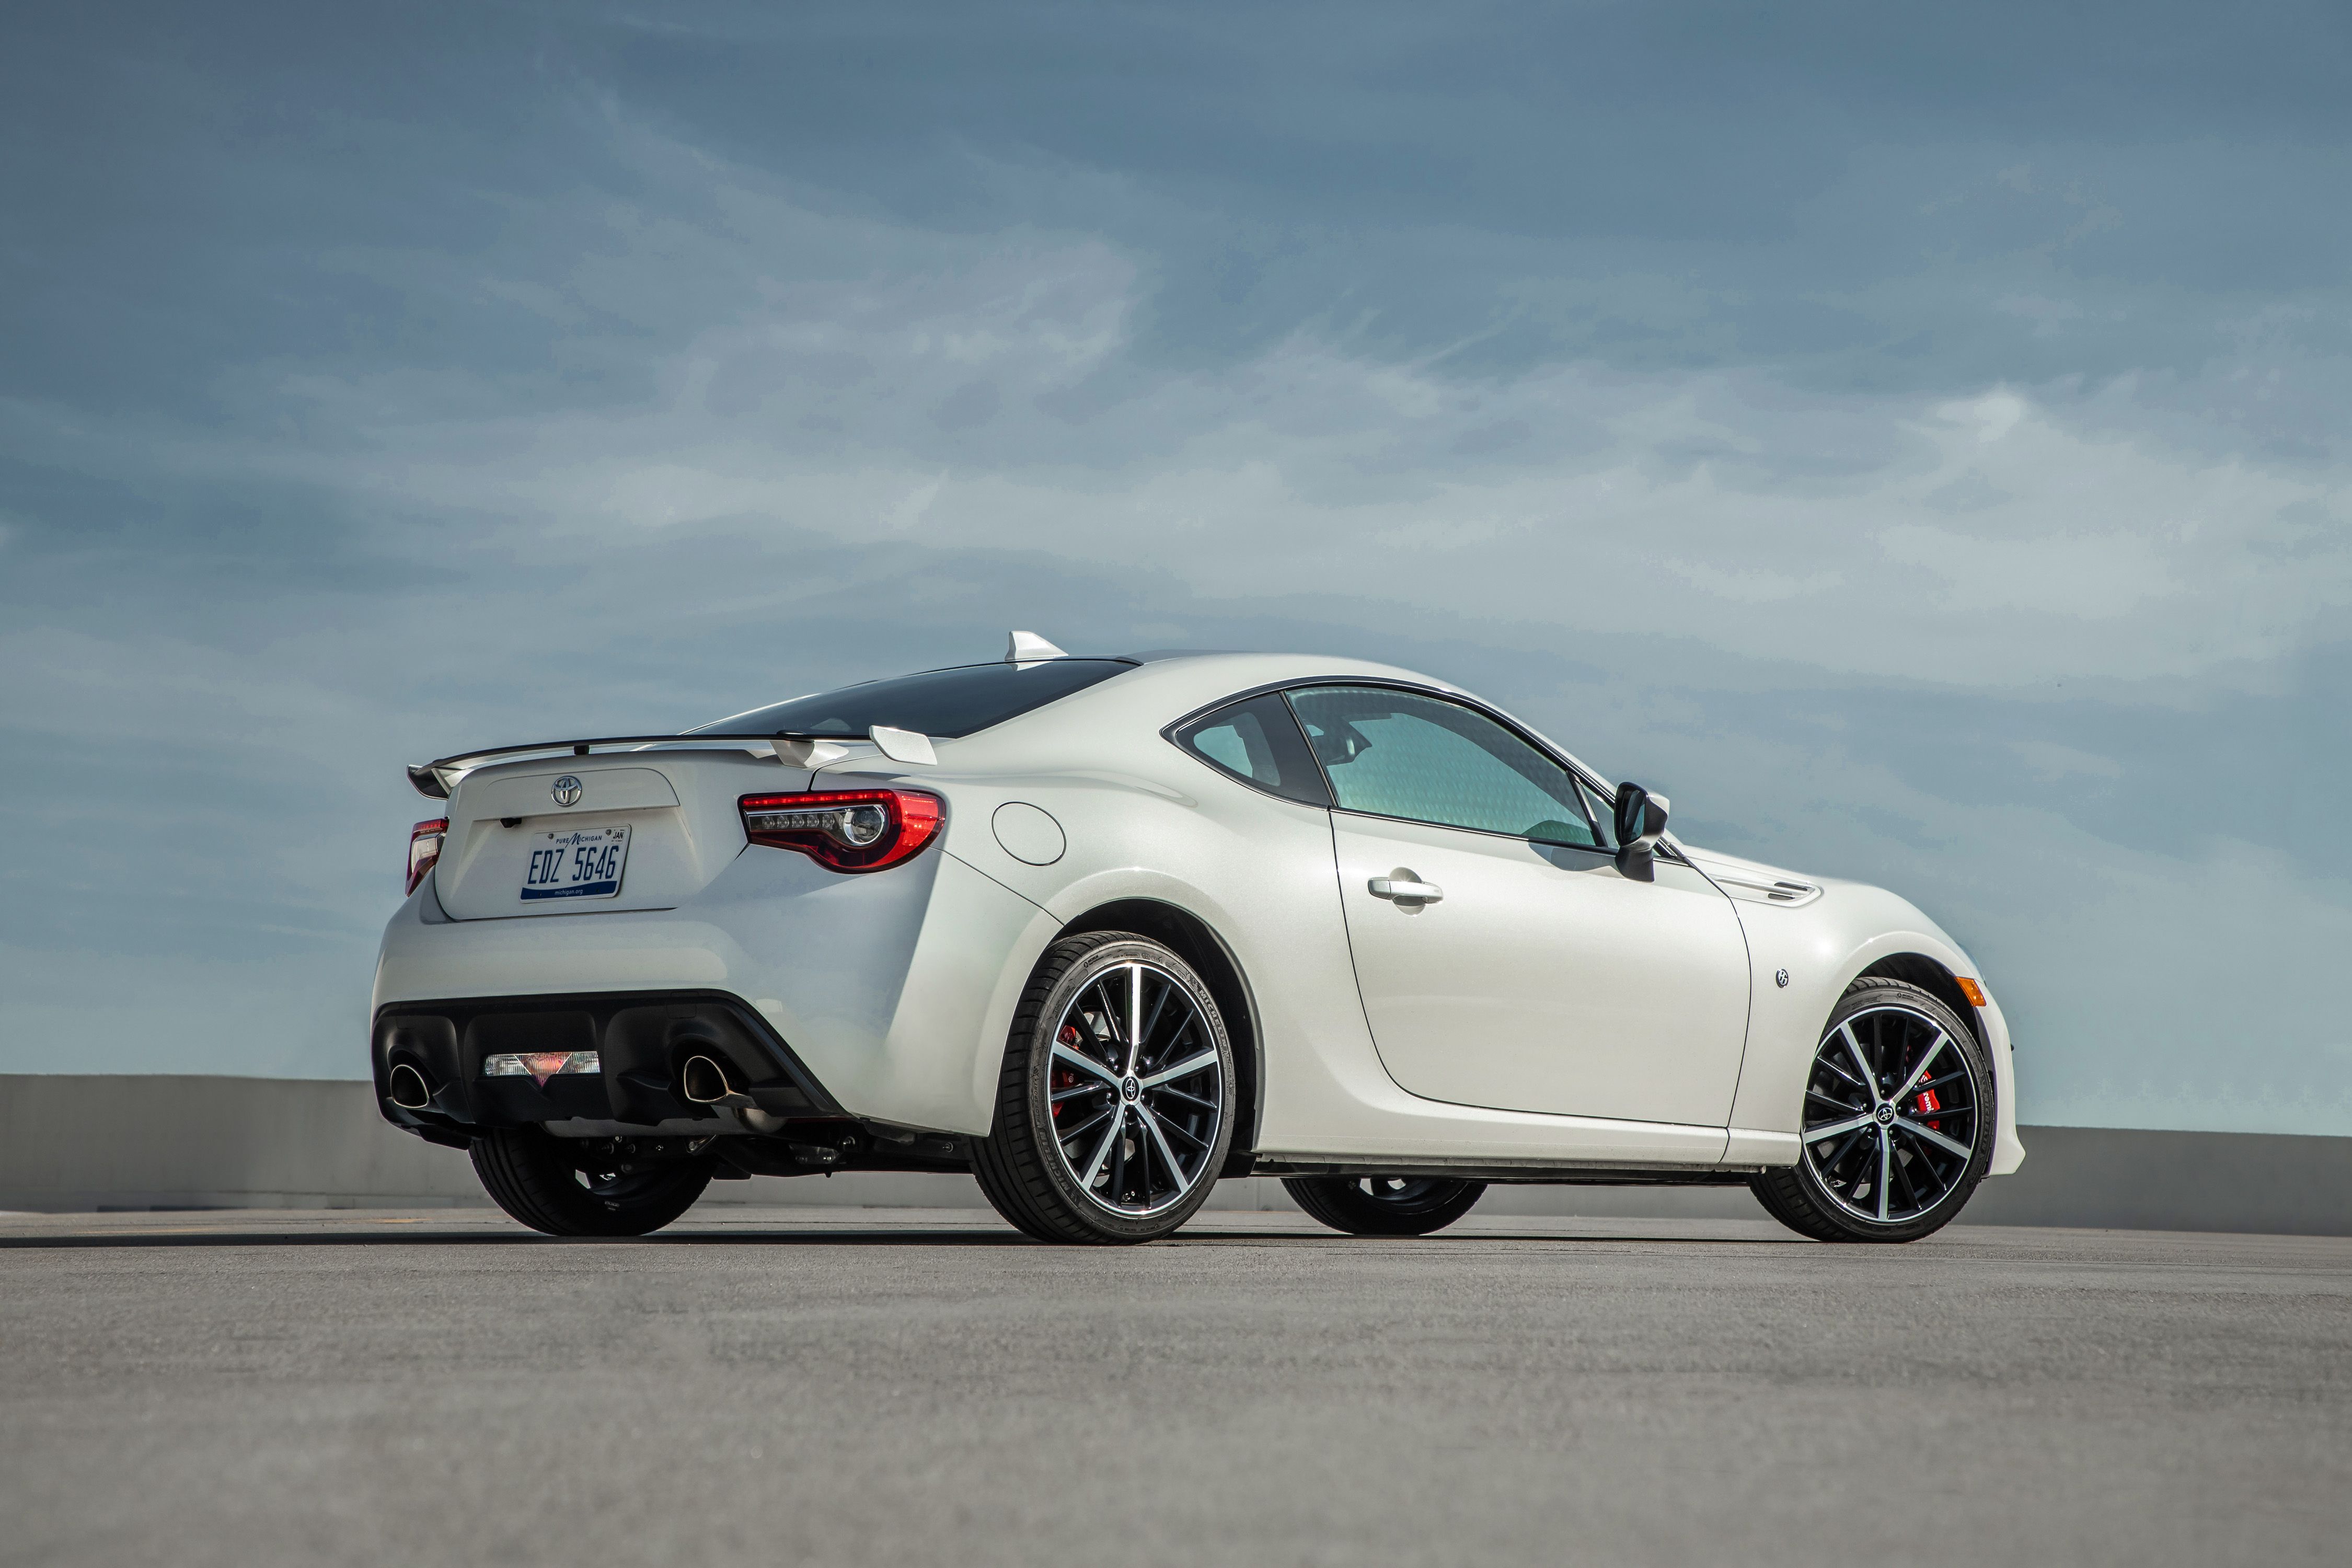 2020 Toyota 86 Prices, Reviews, and Photos - MotorTrend